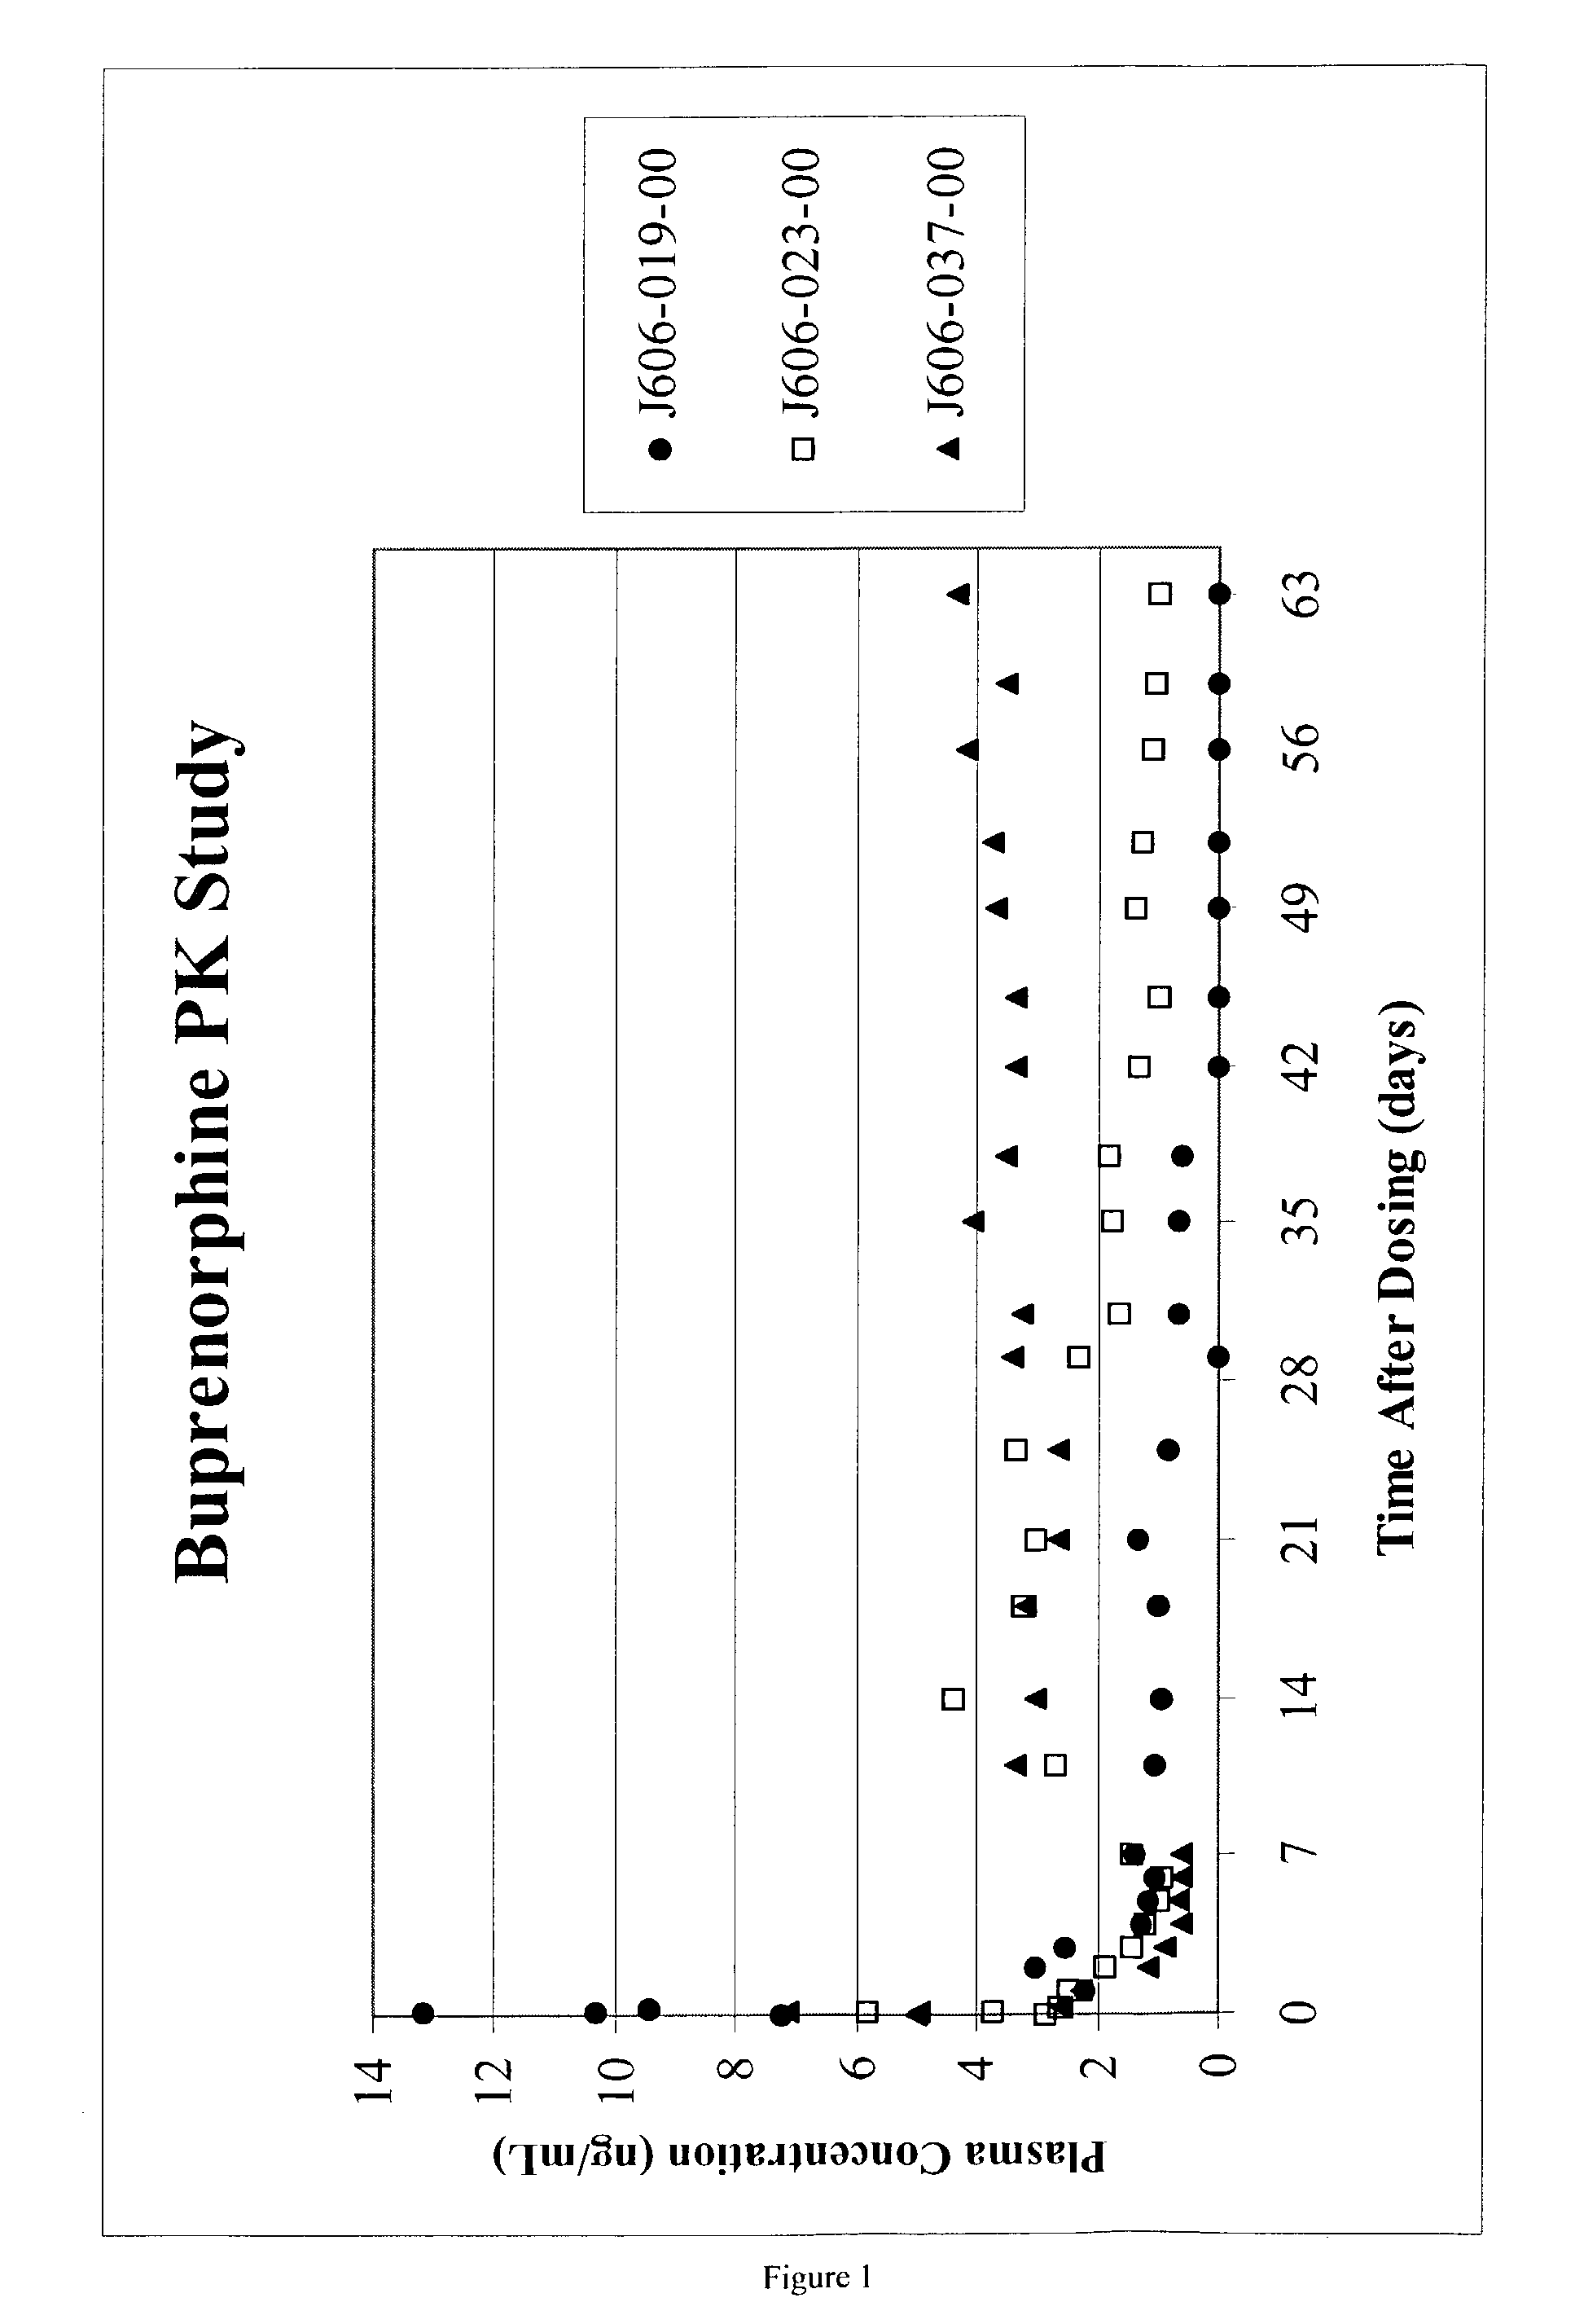 Injectable methadone, methadone and naltrexone, or buprenorphine and naltrexone microparticle compositions and their use in reducing consumption of abused substances